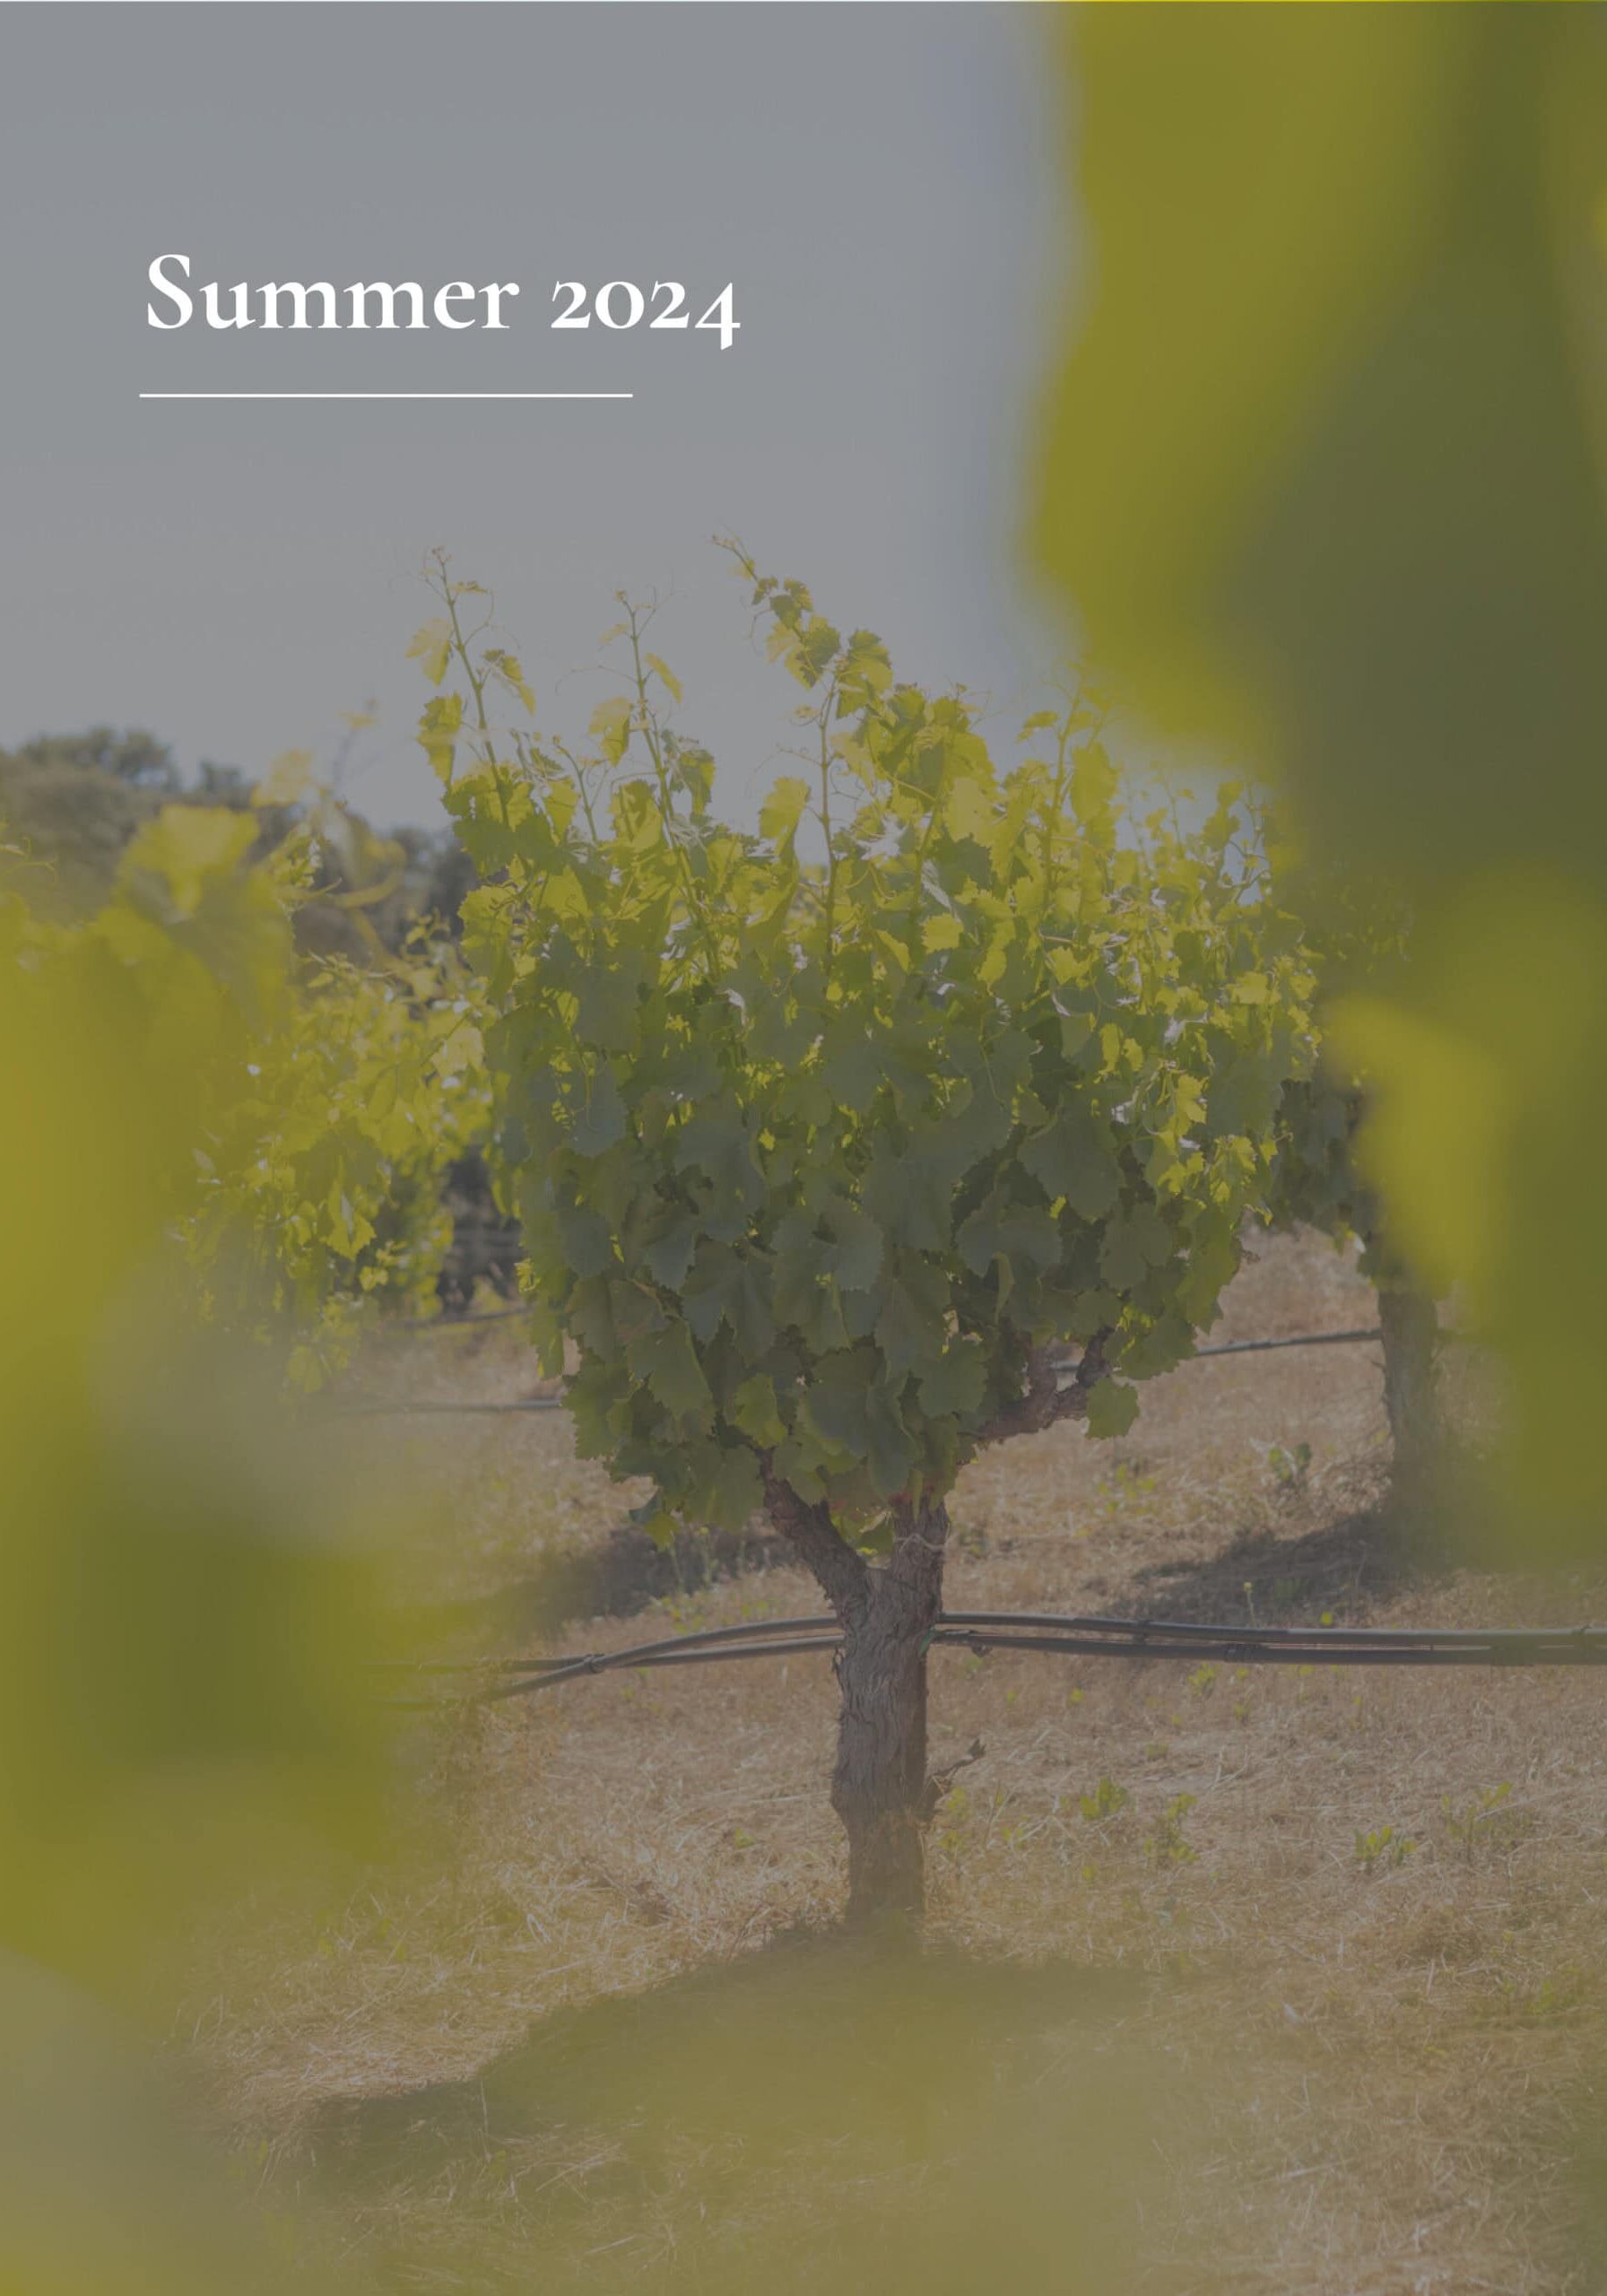 Summer 2024 Newsletter link and photo of a vine